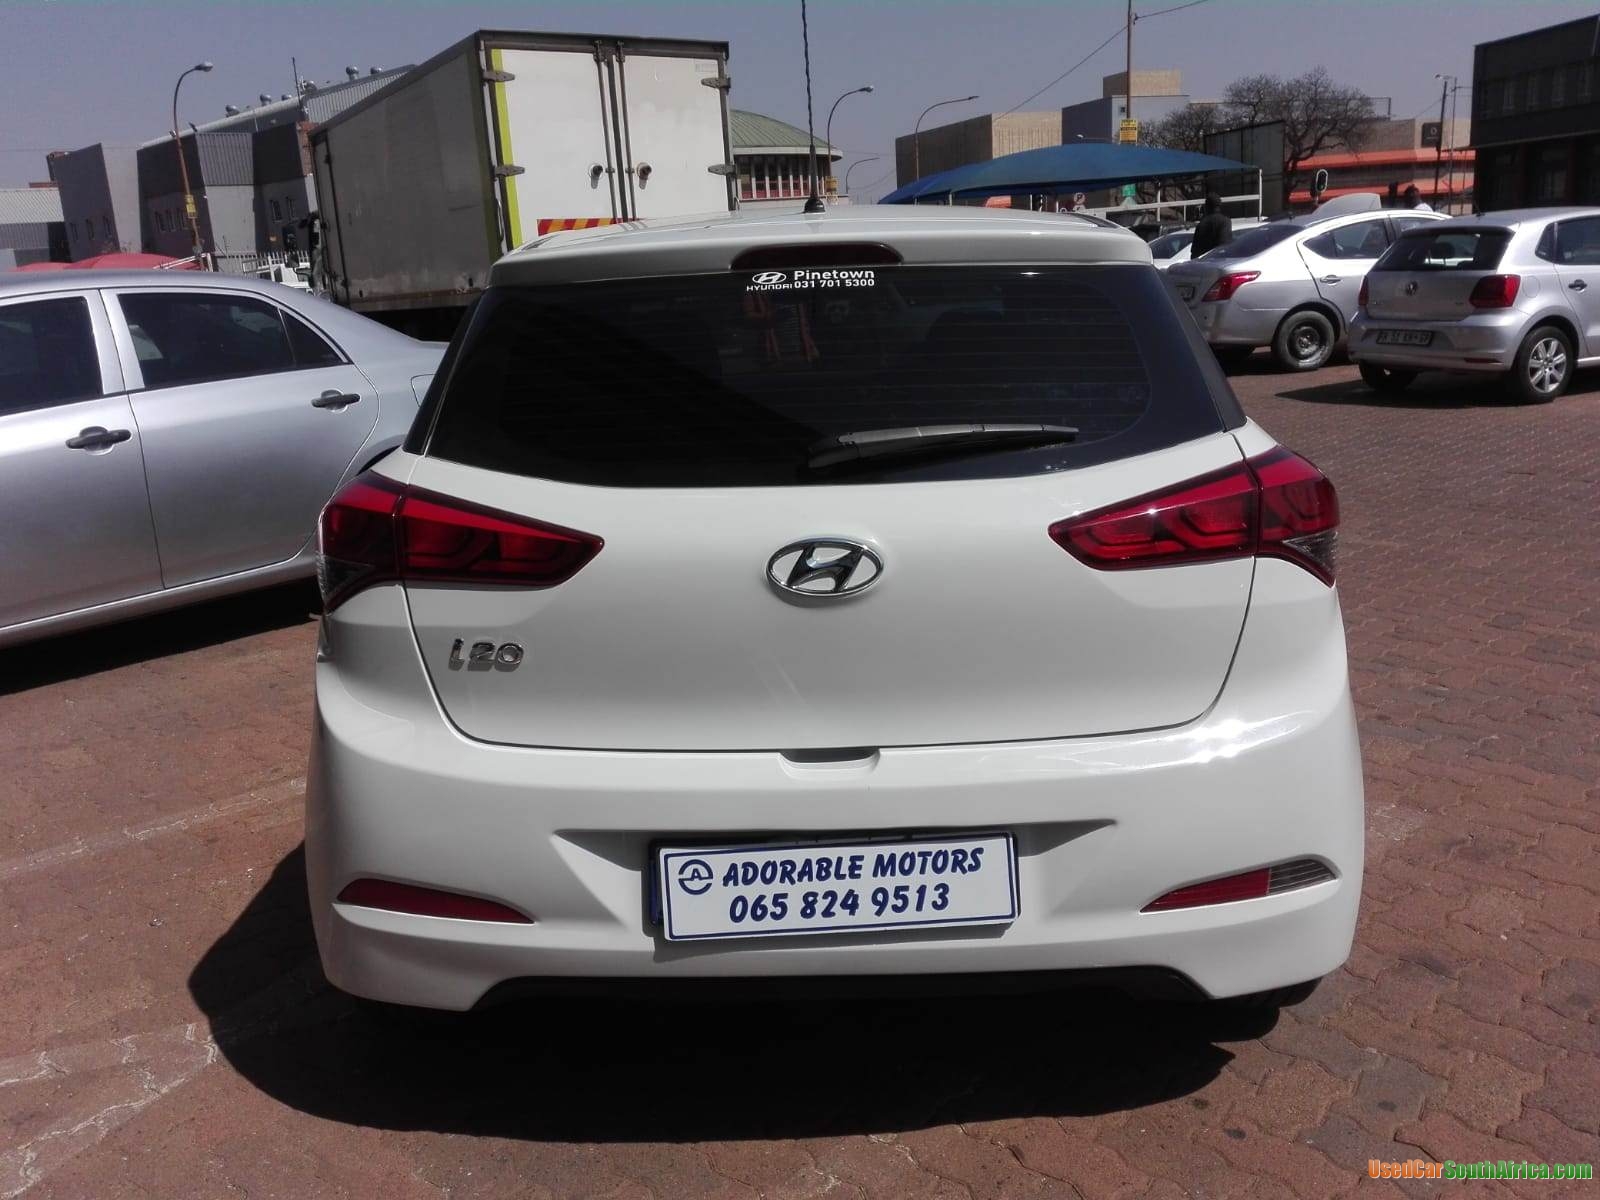 2017 Hyundai I20 GRAND used car for sale in Johannesburg City Gauteng South Africa - OnlyCars.co.za